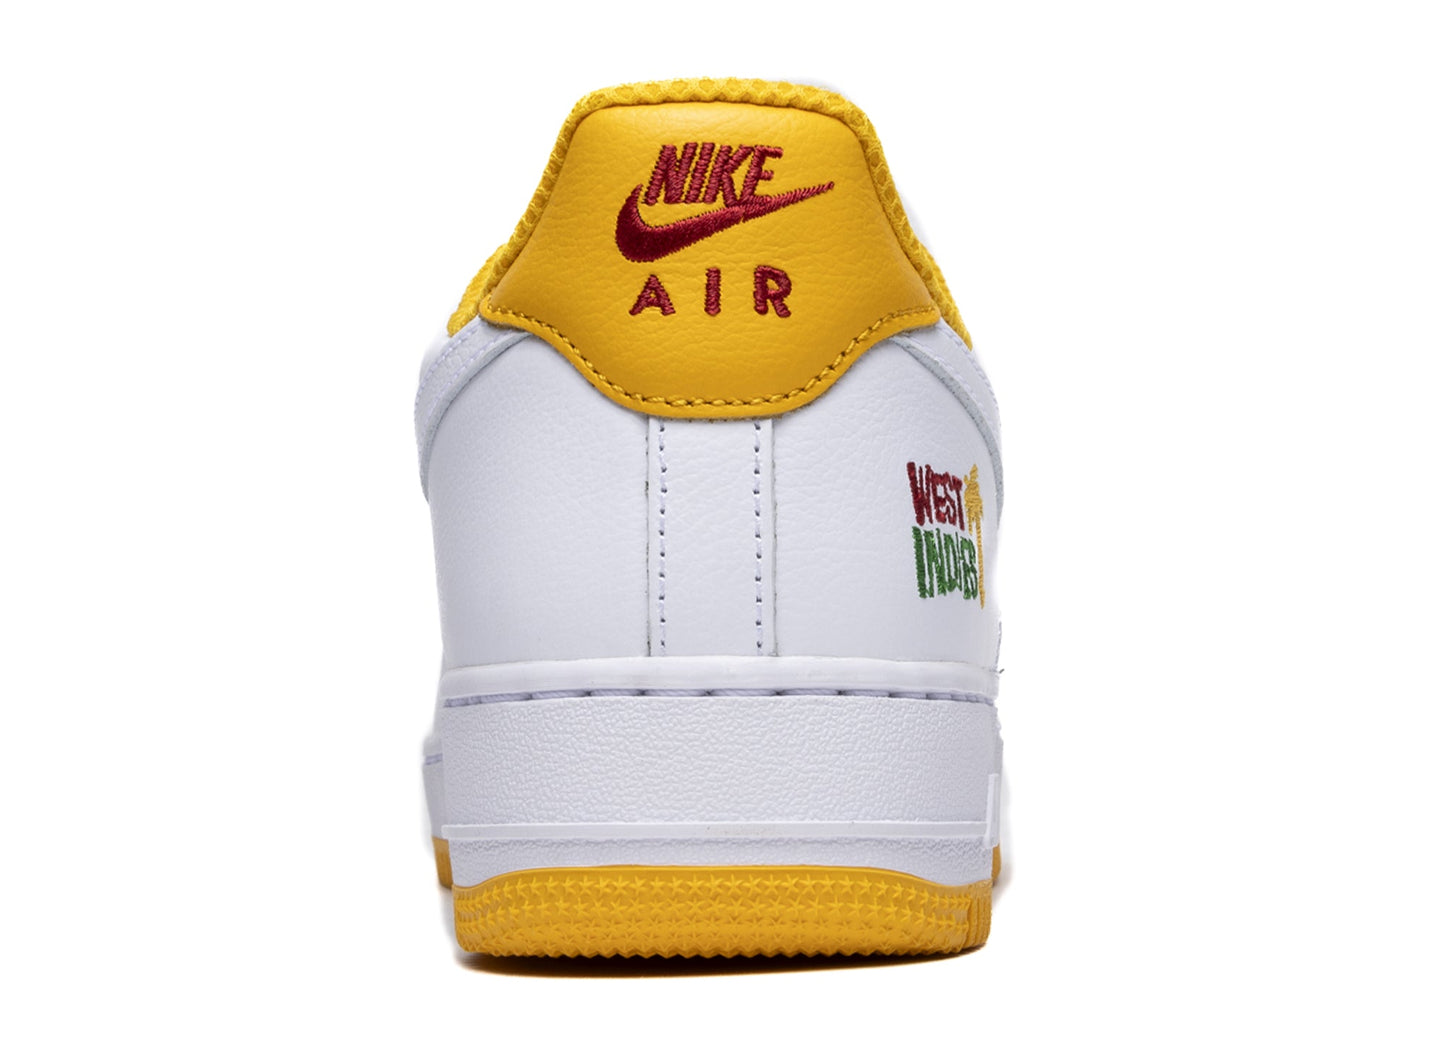 Nike Air Force 1 Low Retro QS 'West indies'